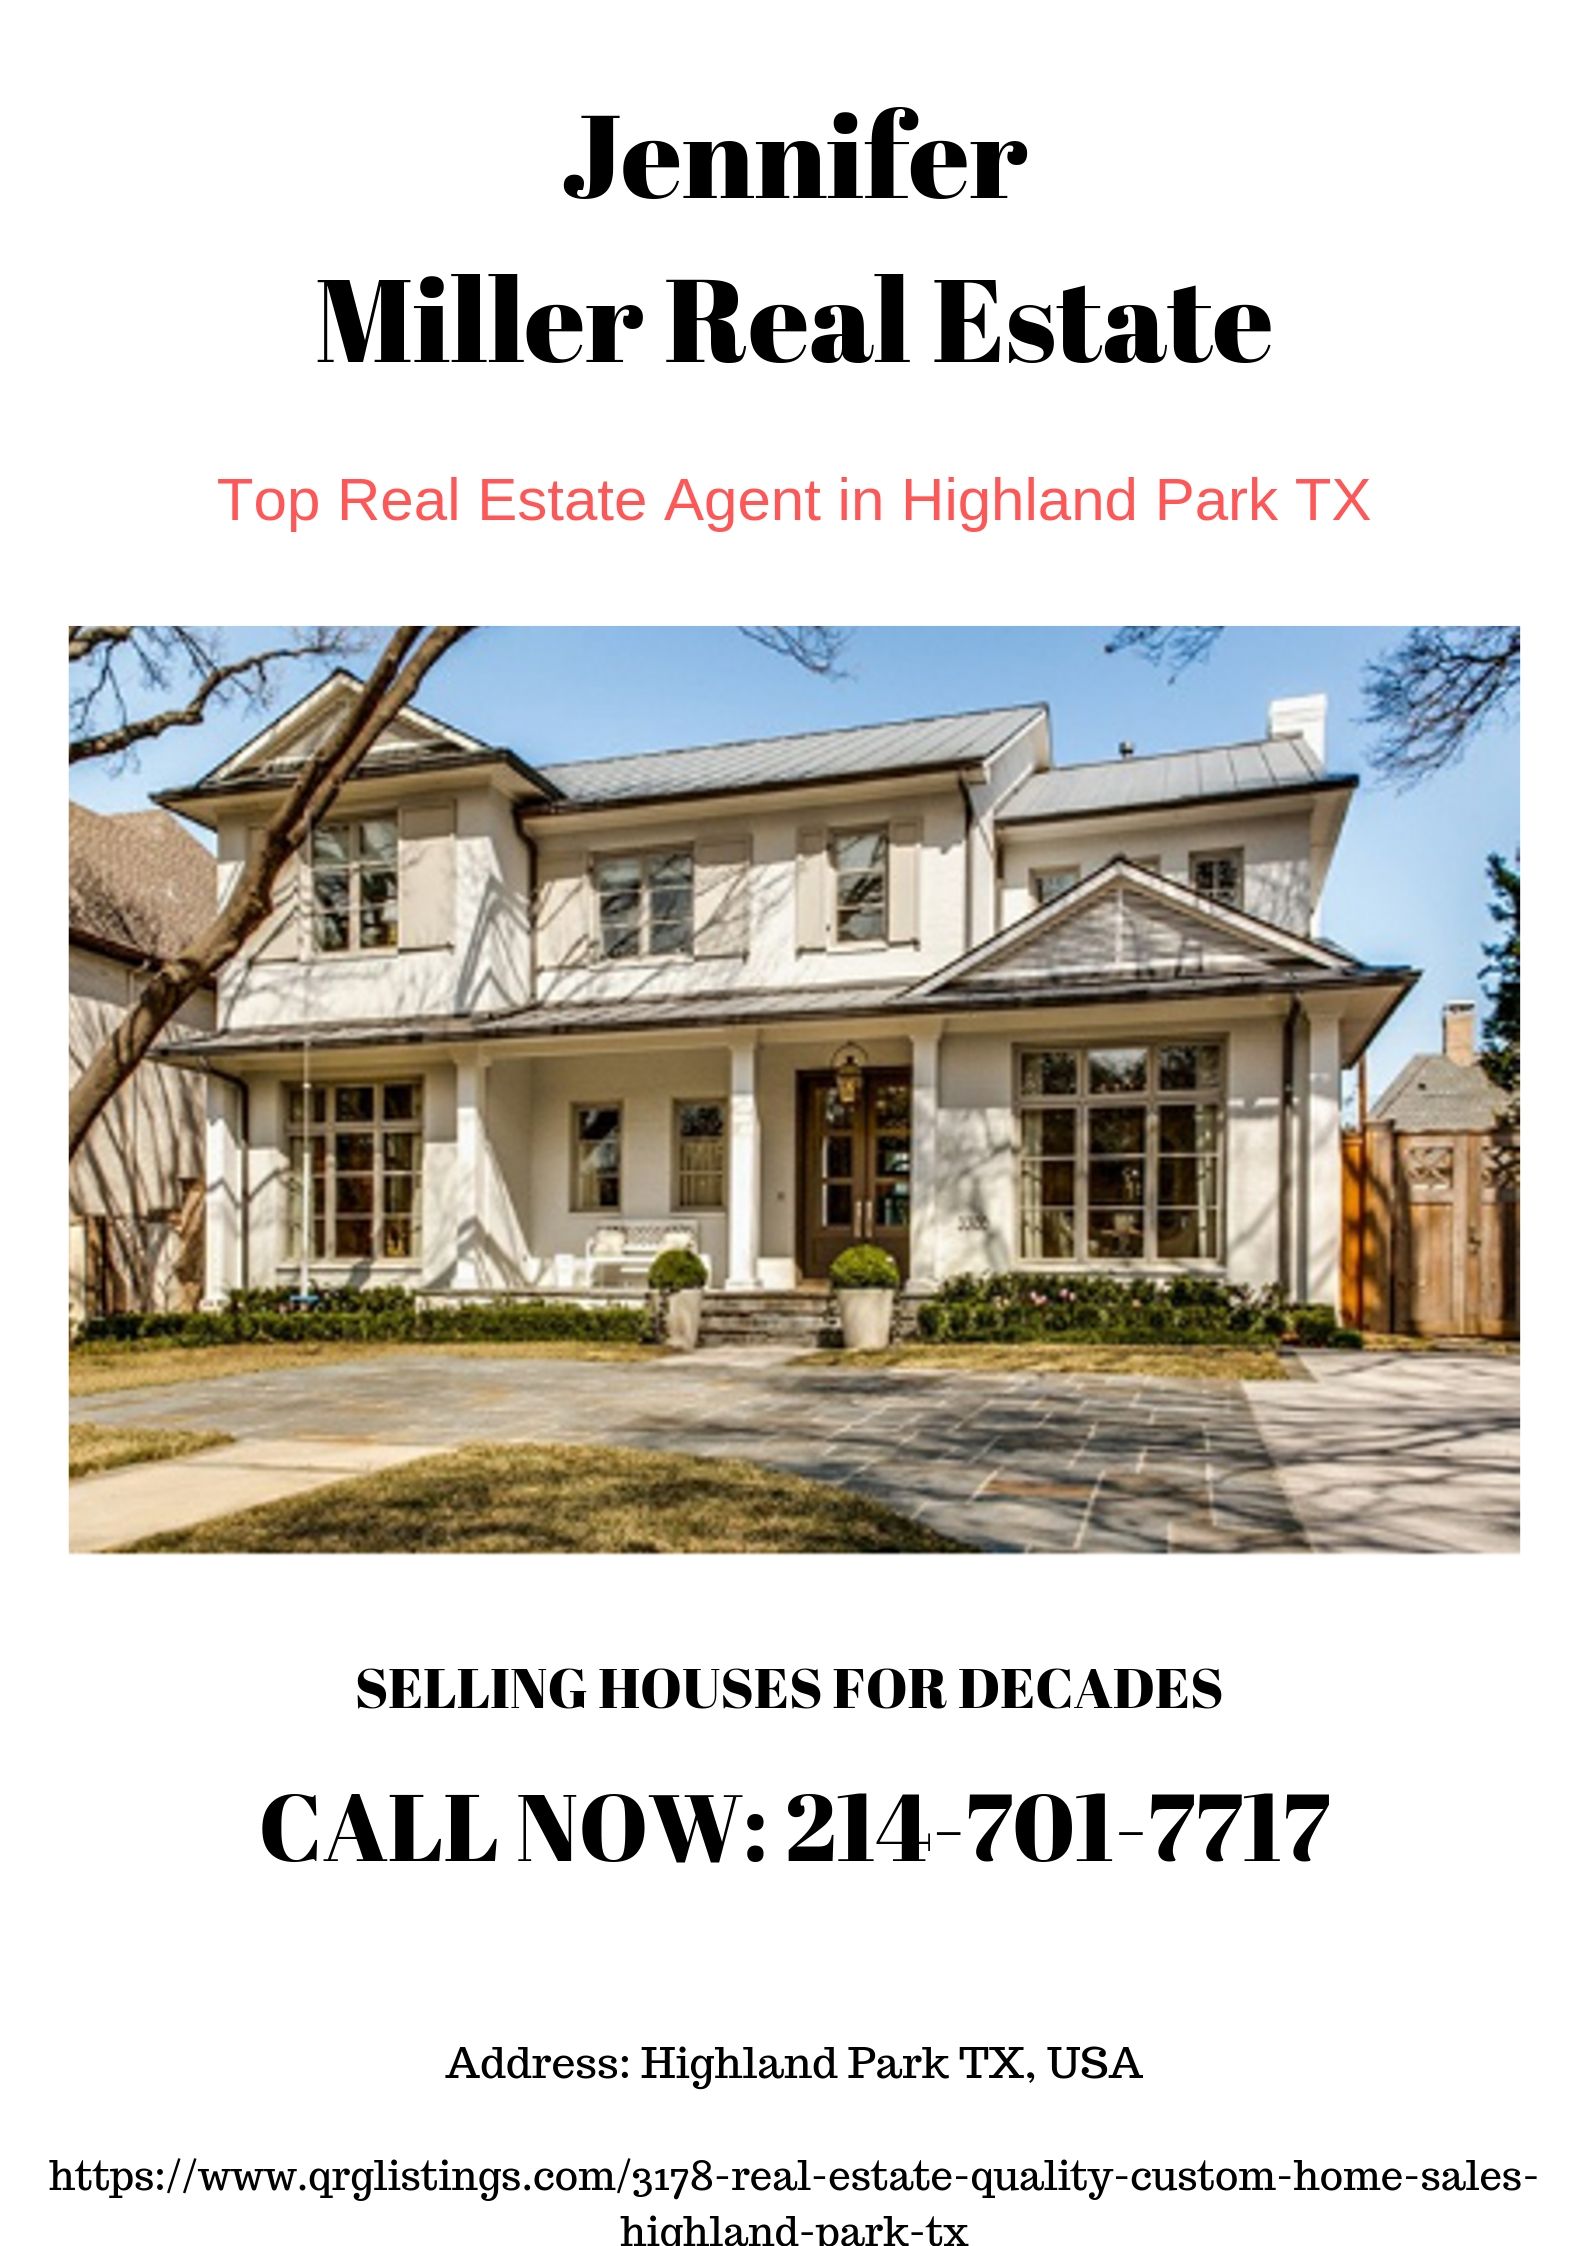 Luxury Home Sales in Highland Park TX